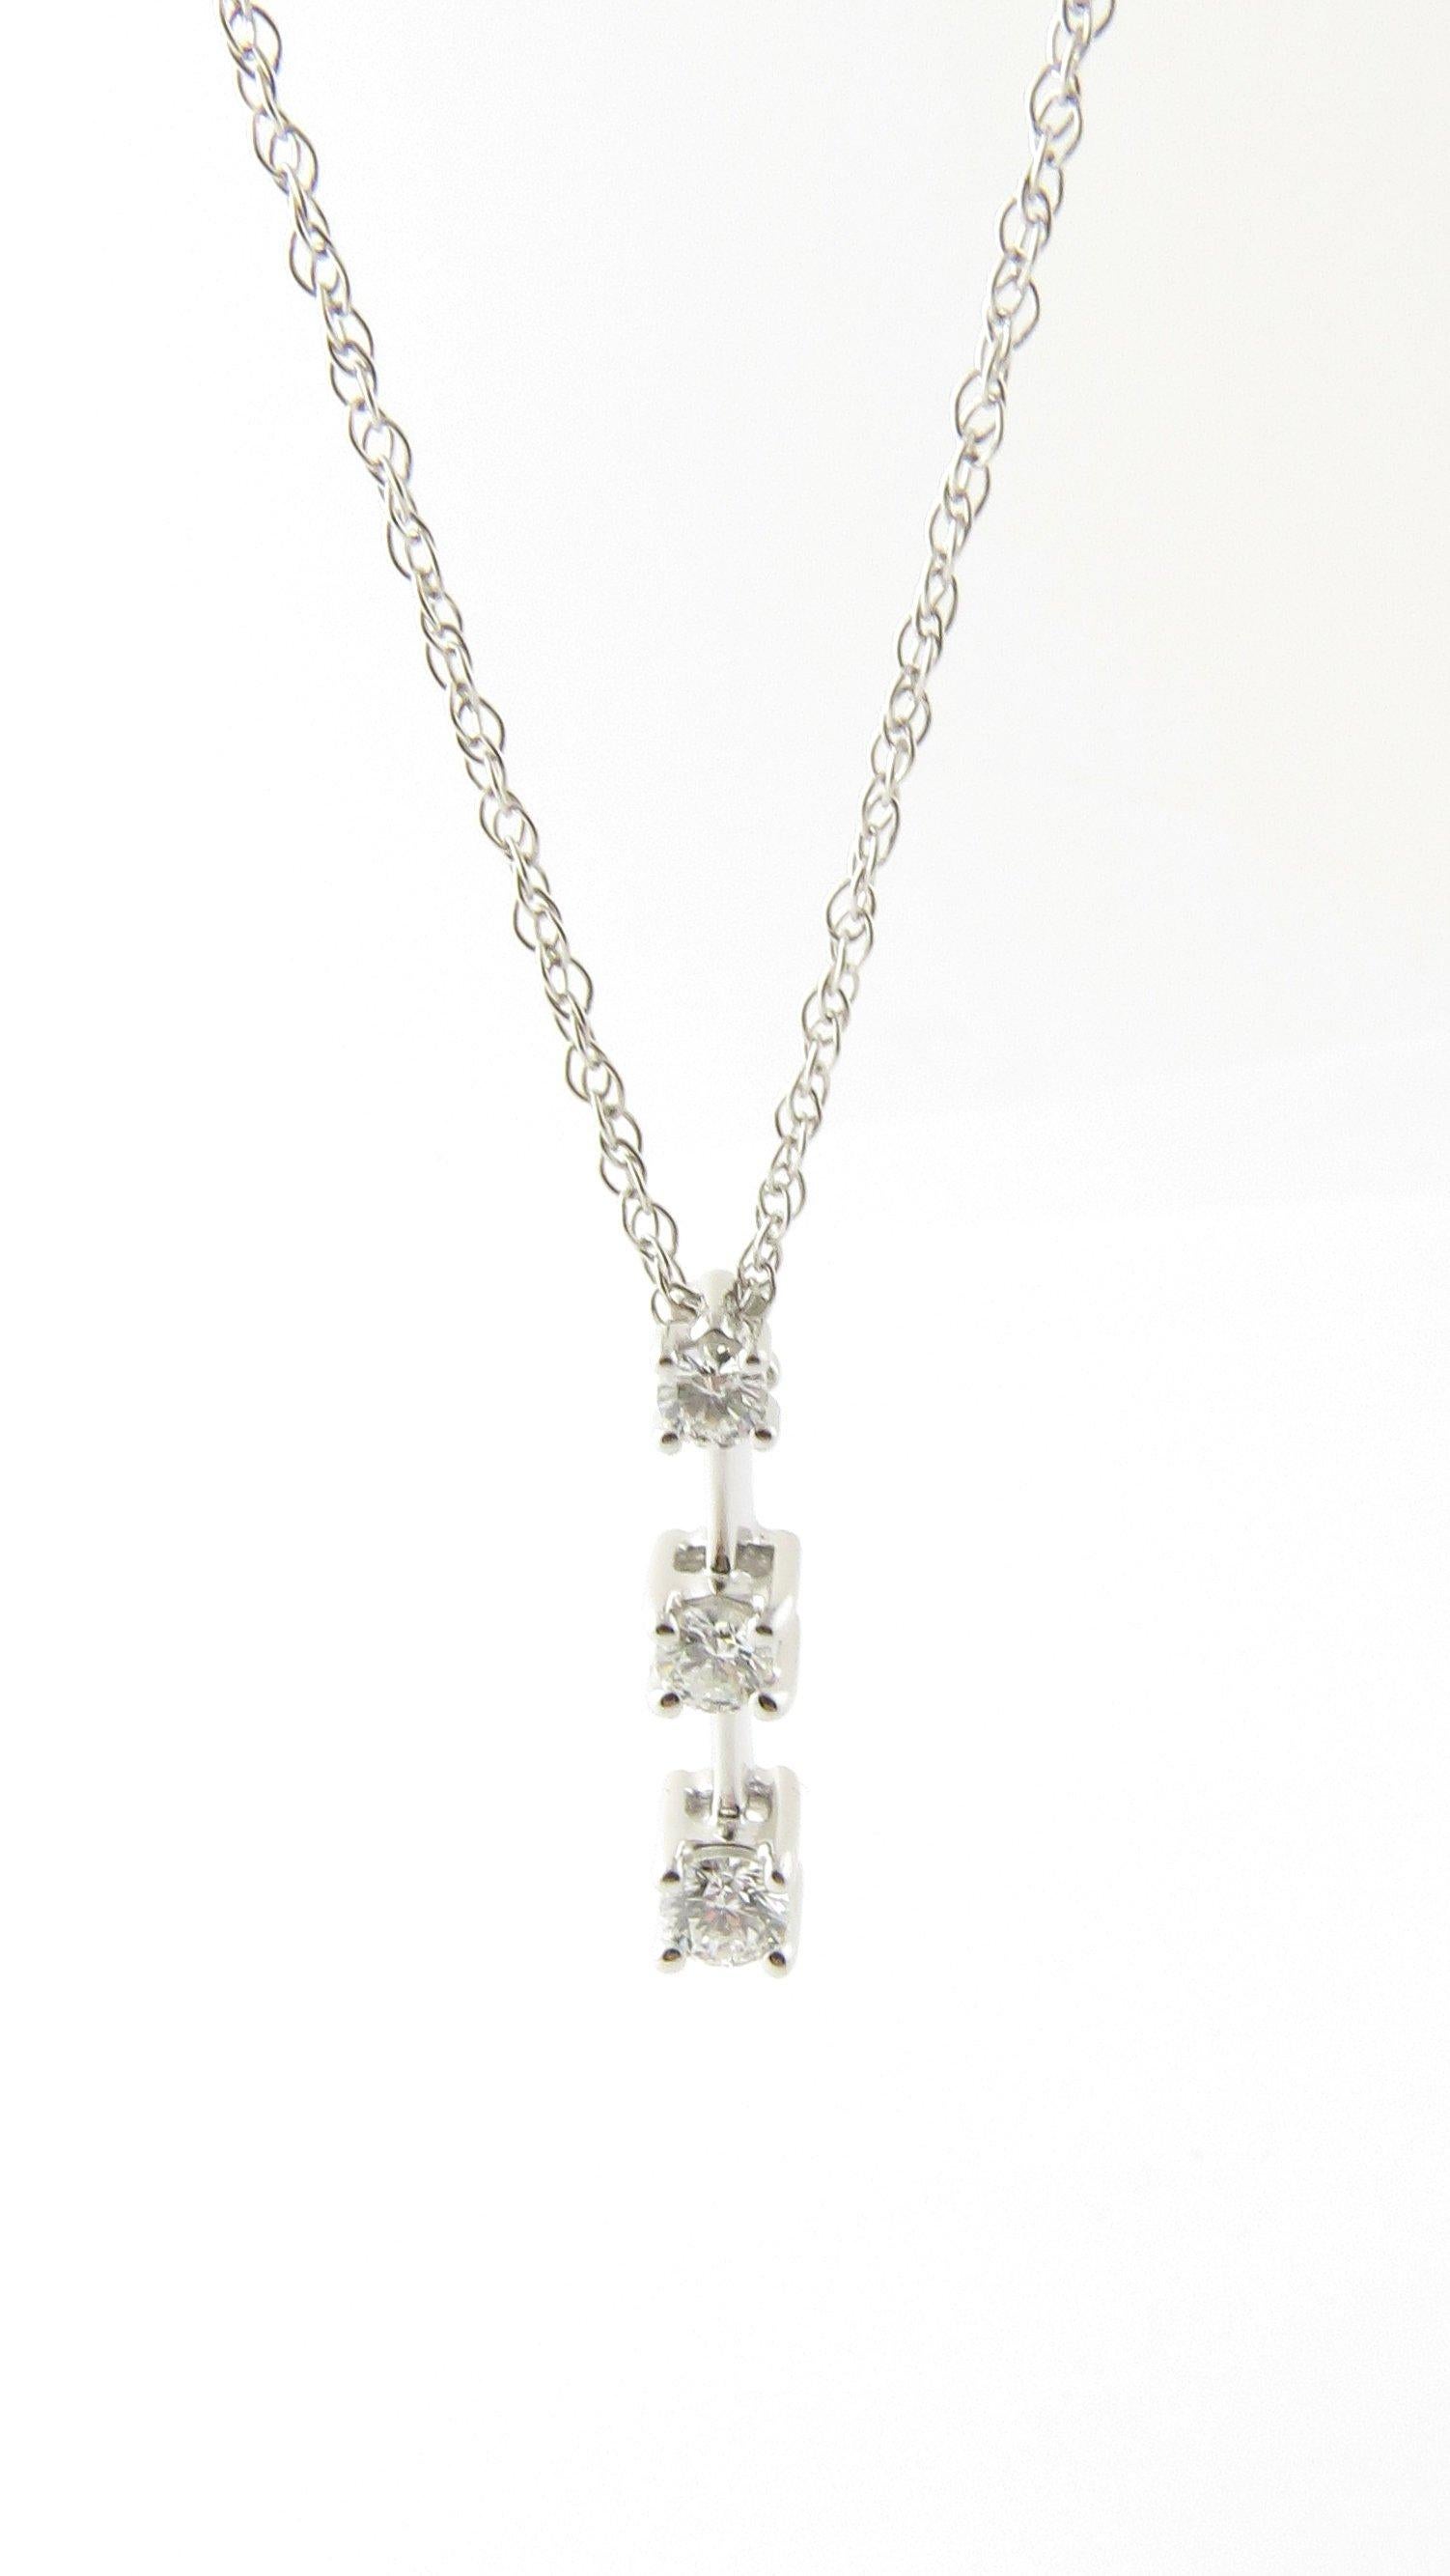 Vintage 14 Karat White Gold Diamond Pendant Necklace. This sparkling pendant features three round brilliant cut diamonds (.05 ct., .07 ct., .10 ct.) suspended from a classic 14K white gold necklace. 
Approximate total diamond weight: .22 ct. Diamond